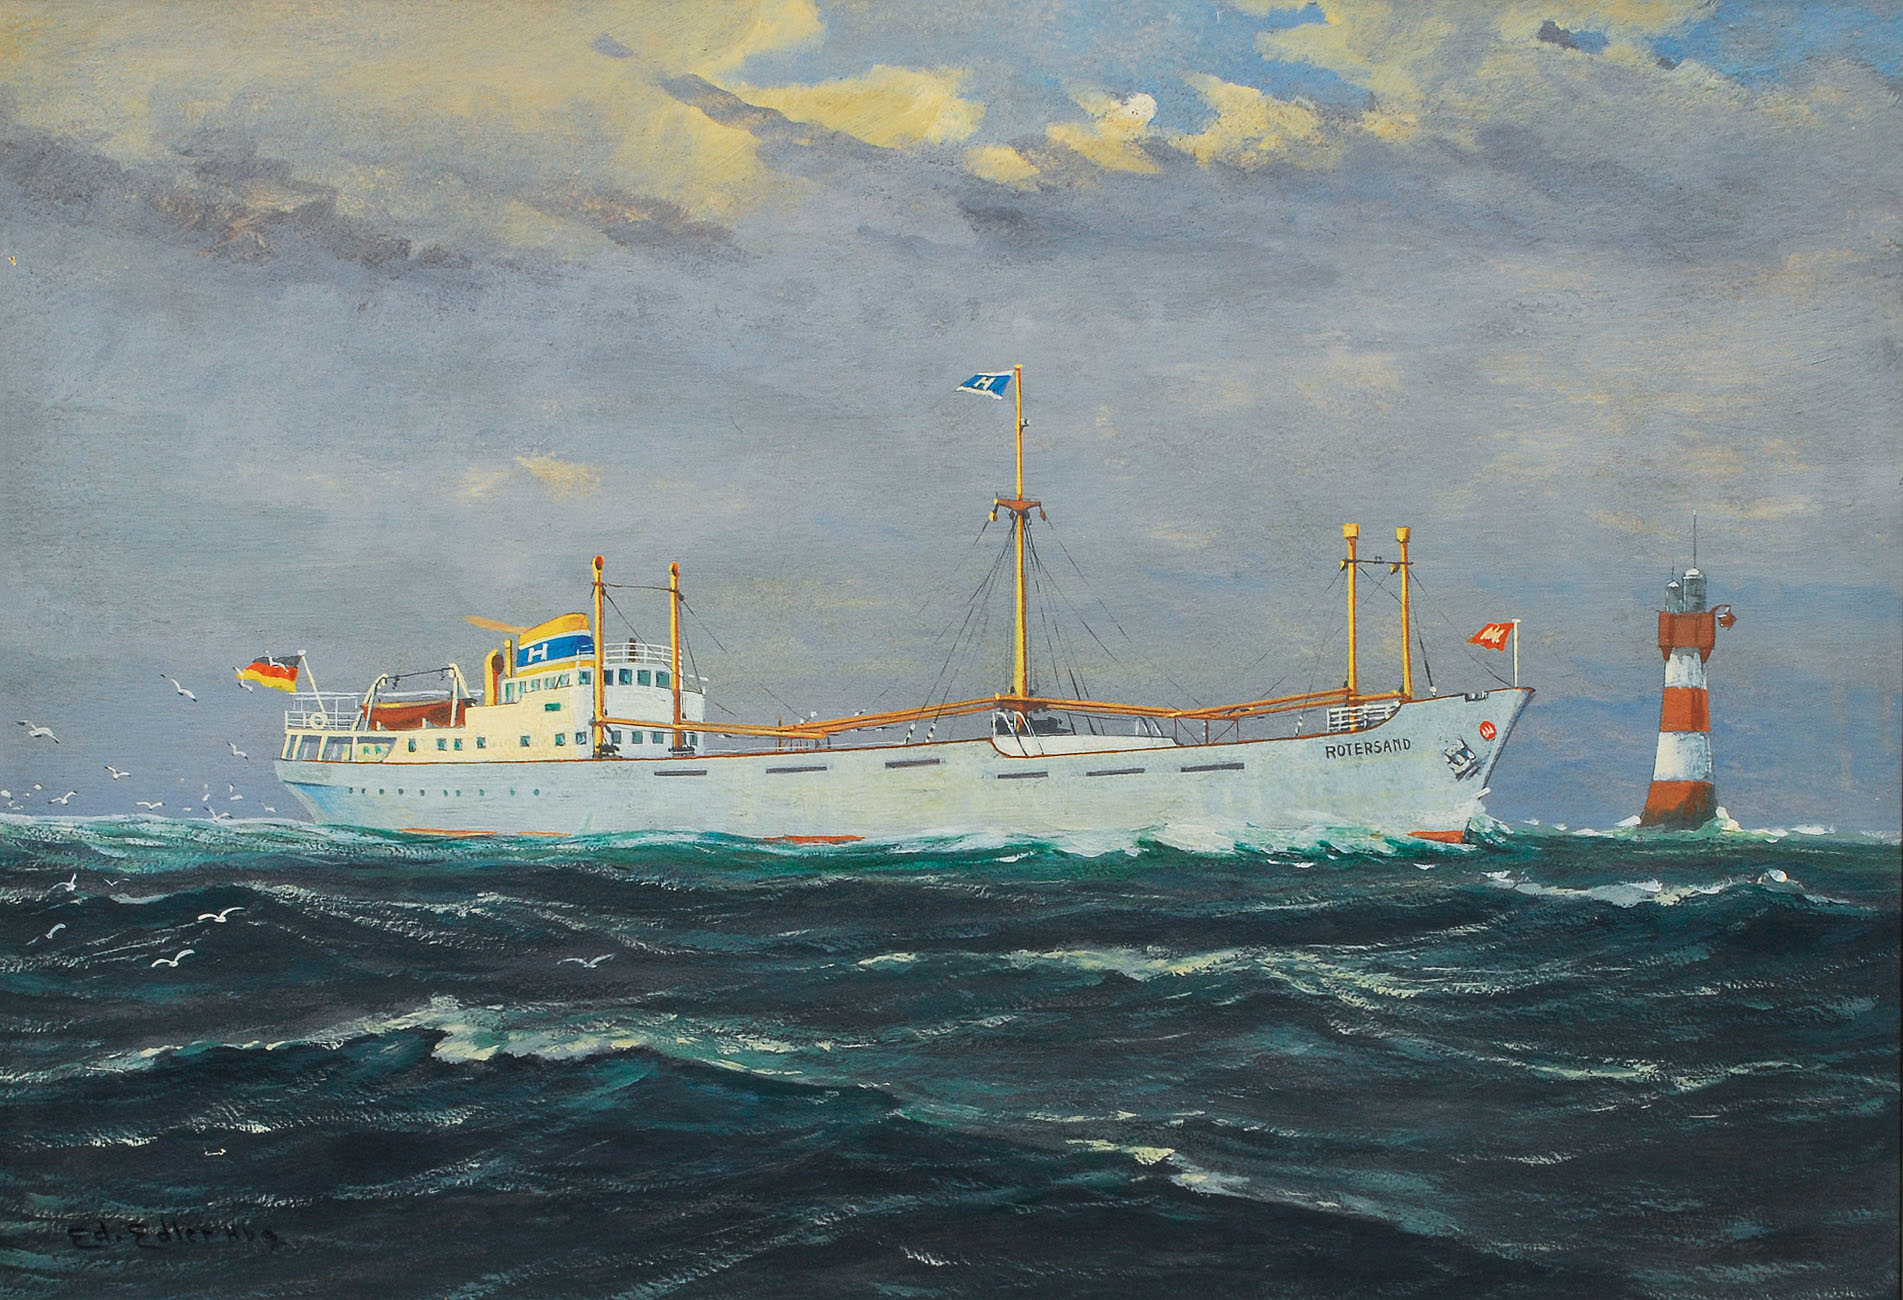 Ships portrait of the cargo ship 'Rotersand'